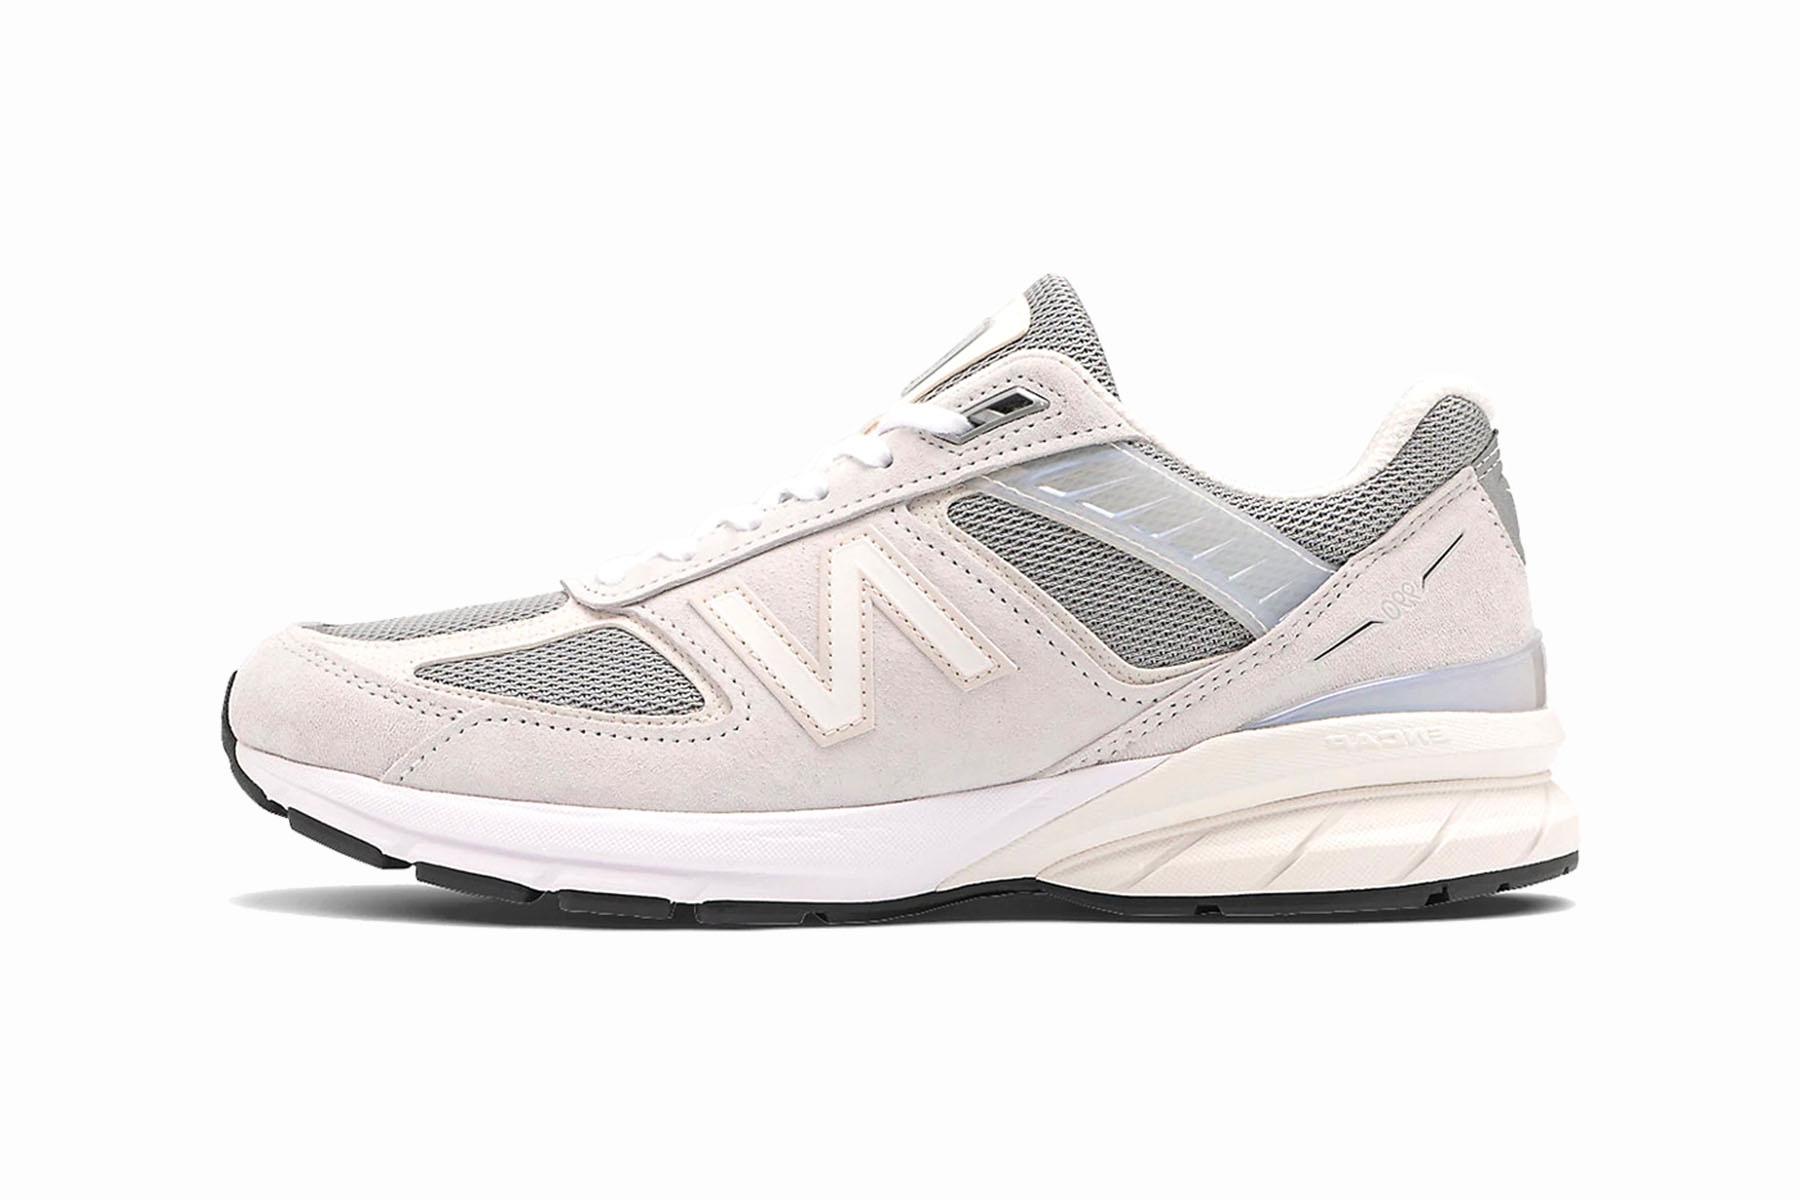 New Balance Made in US 990v5 